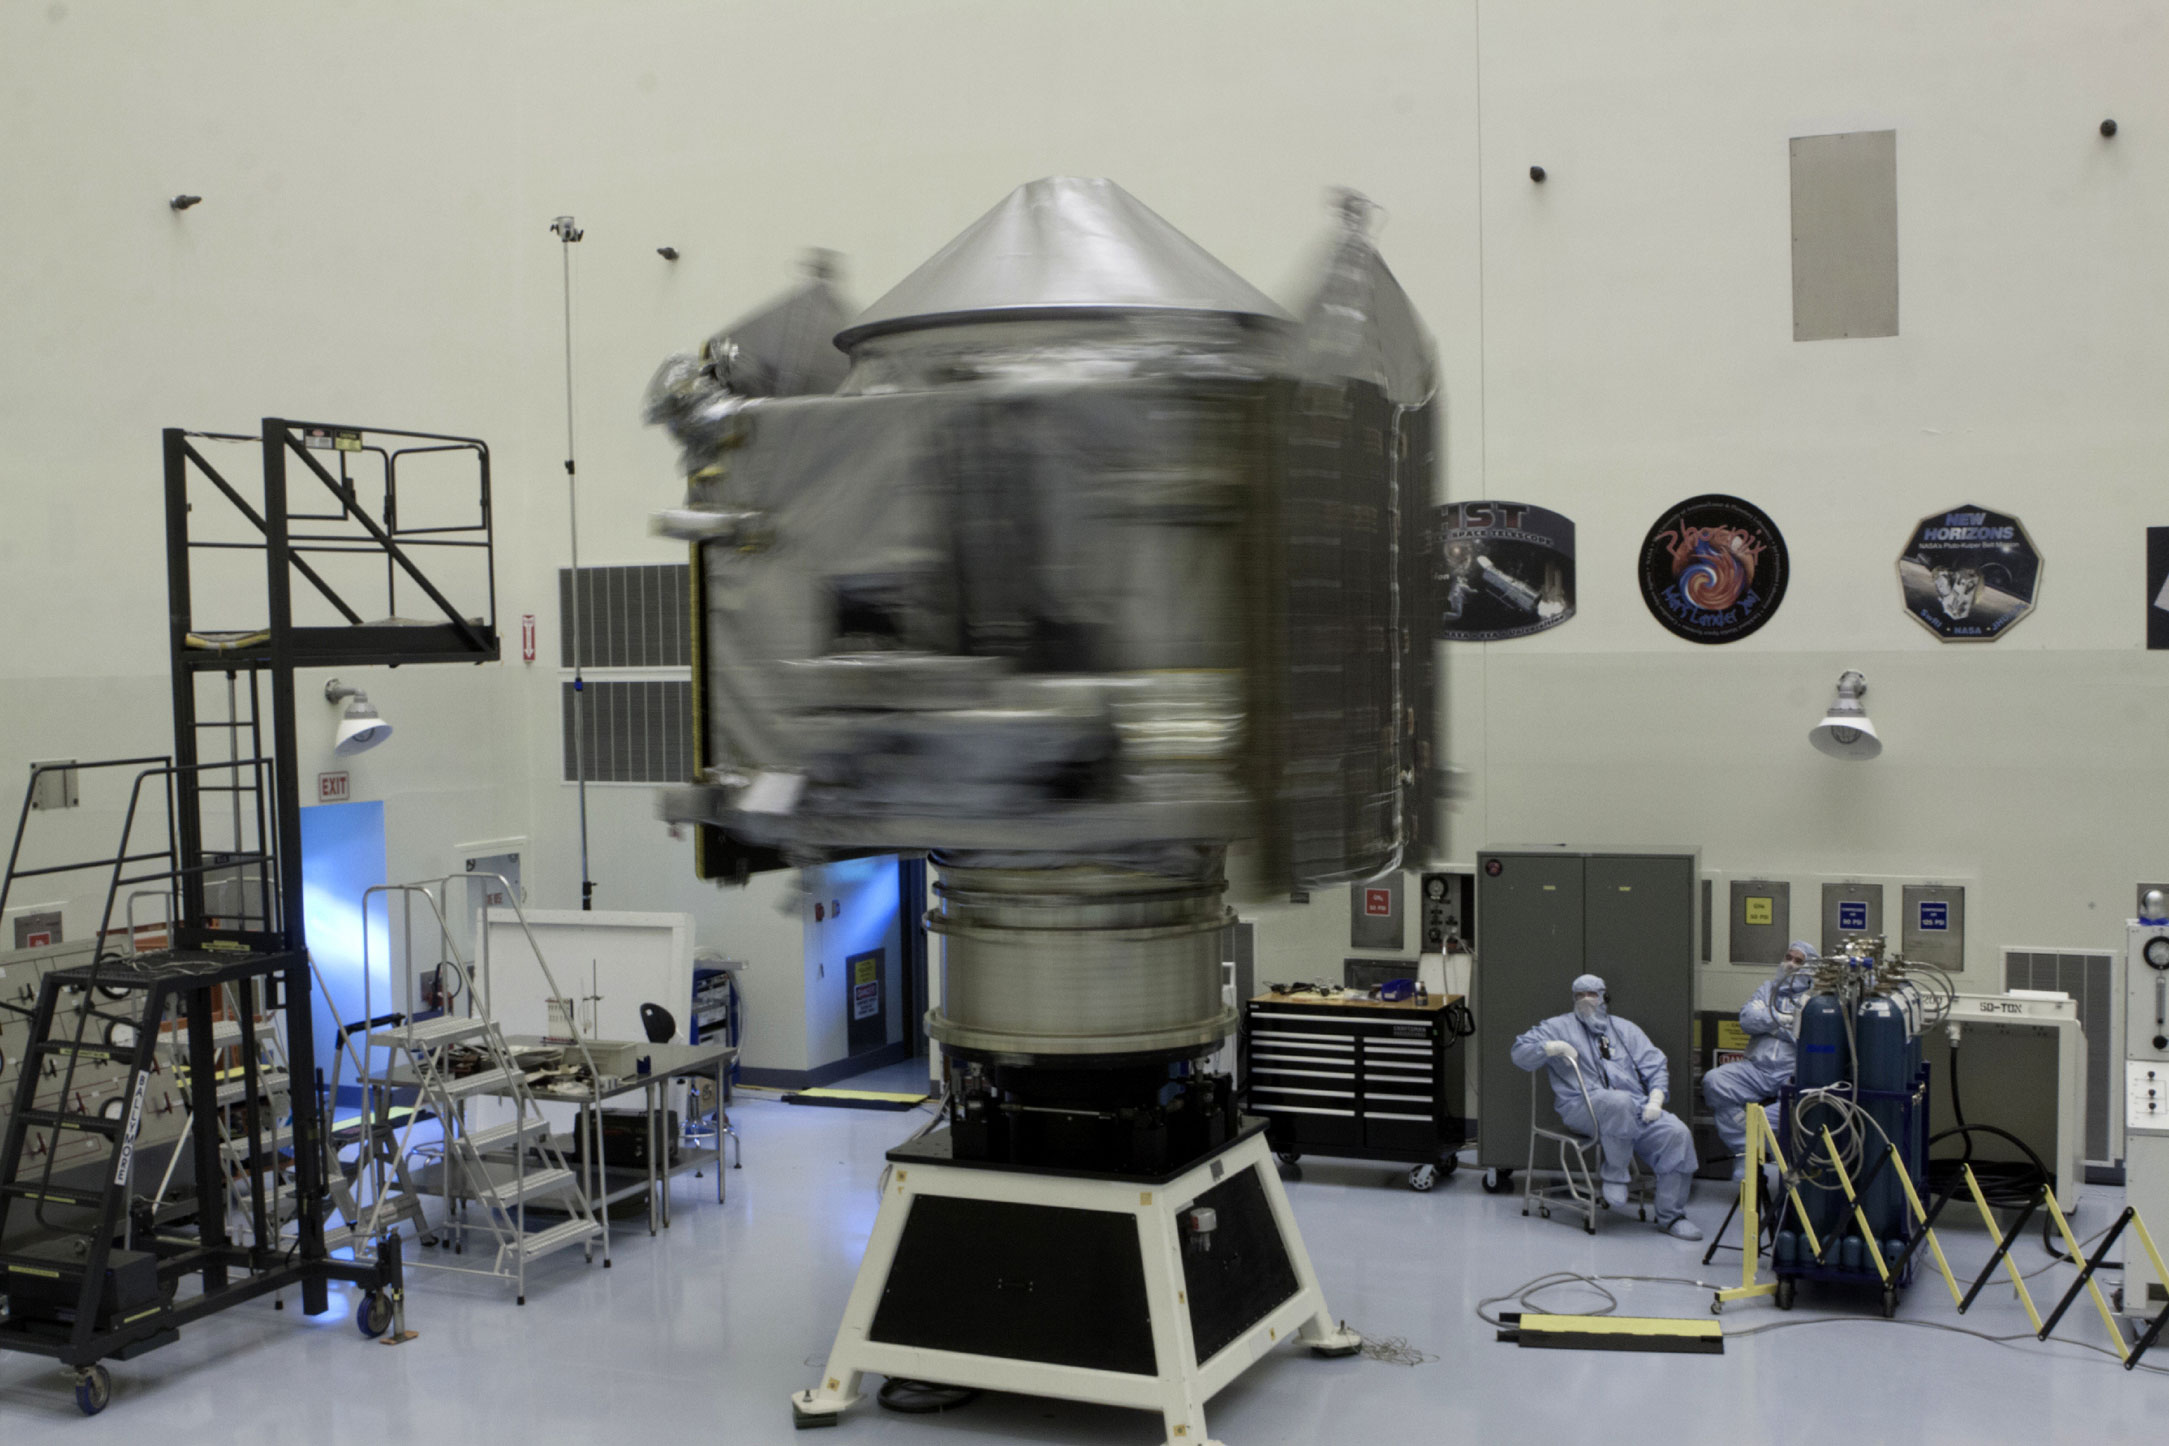 Inside the Payload Hazardous Servicing Facility at NASA's Kennedy Space Center in Florida, engineers and technicians perform a spin test of the Mars Atmosphere and Volatile Evolution, or MAVEN, spacecraft.